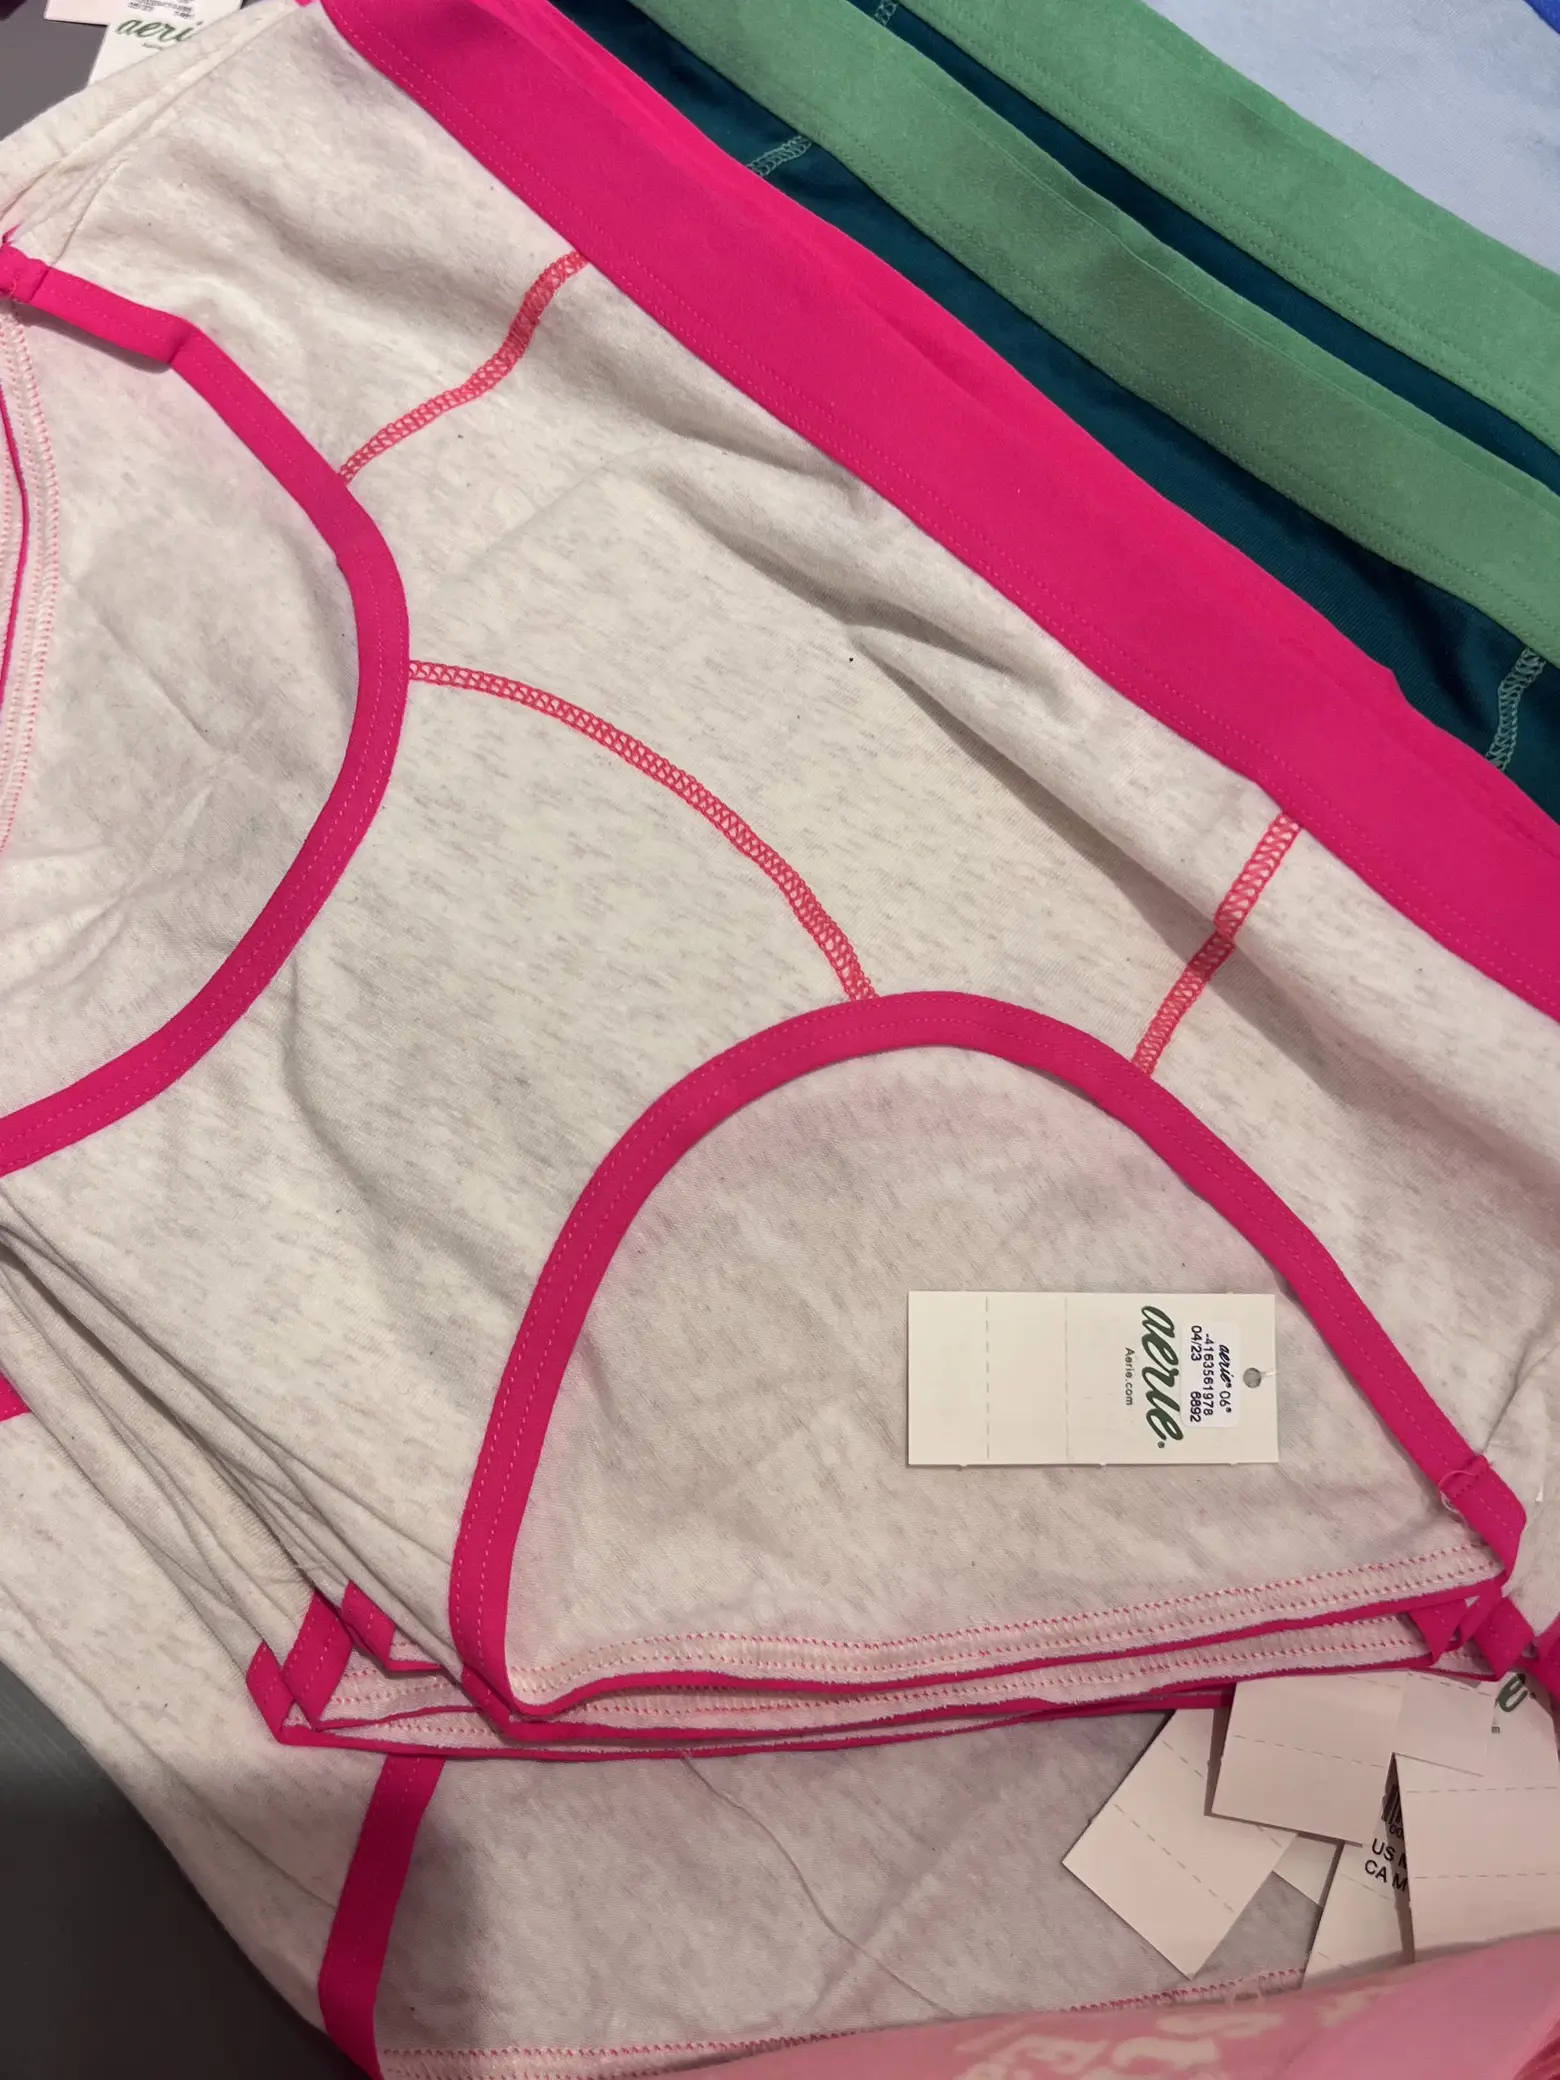 Better undies for less?!? PINK CANCELED